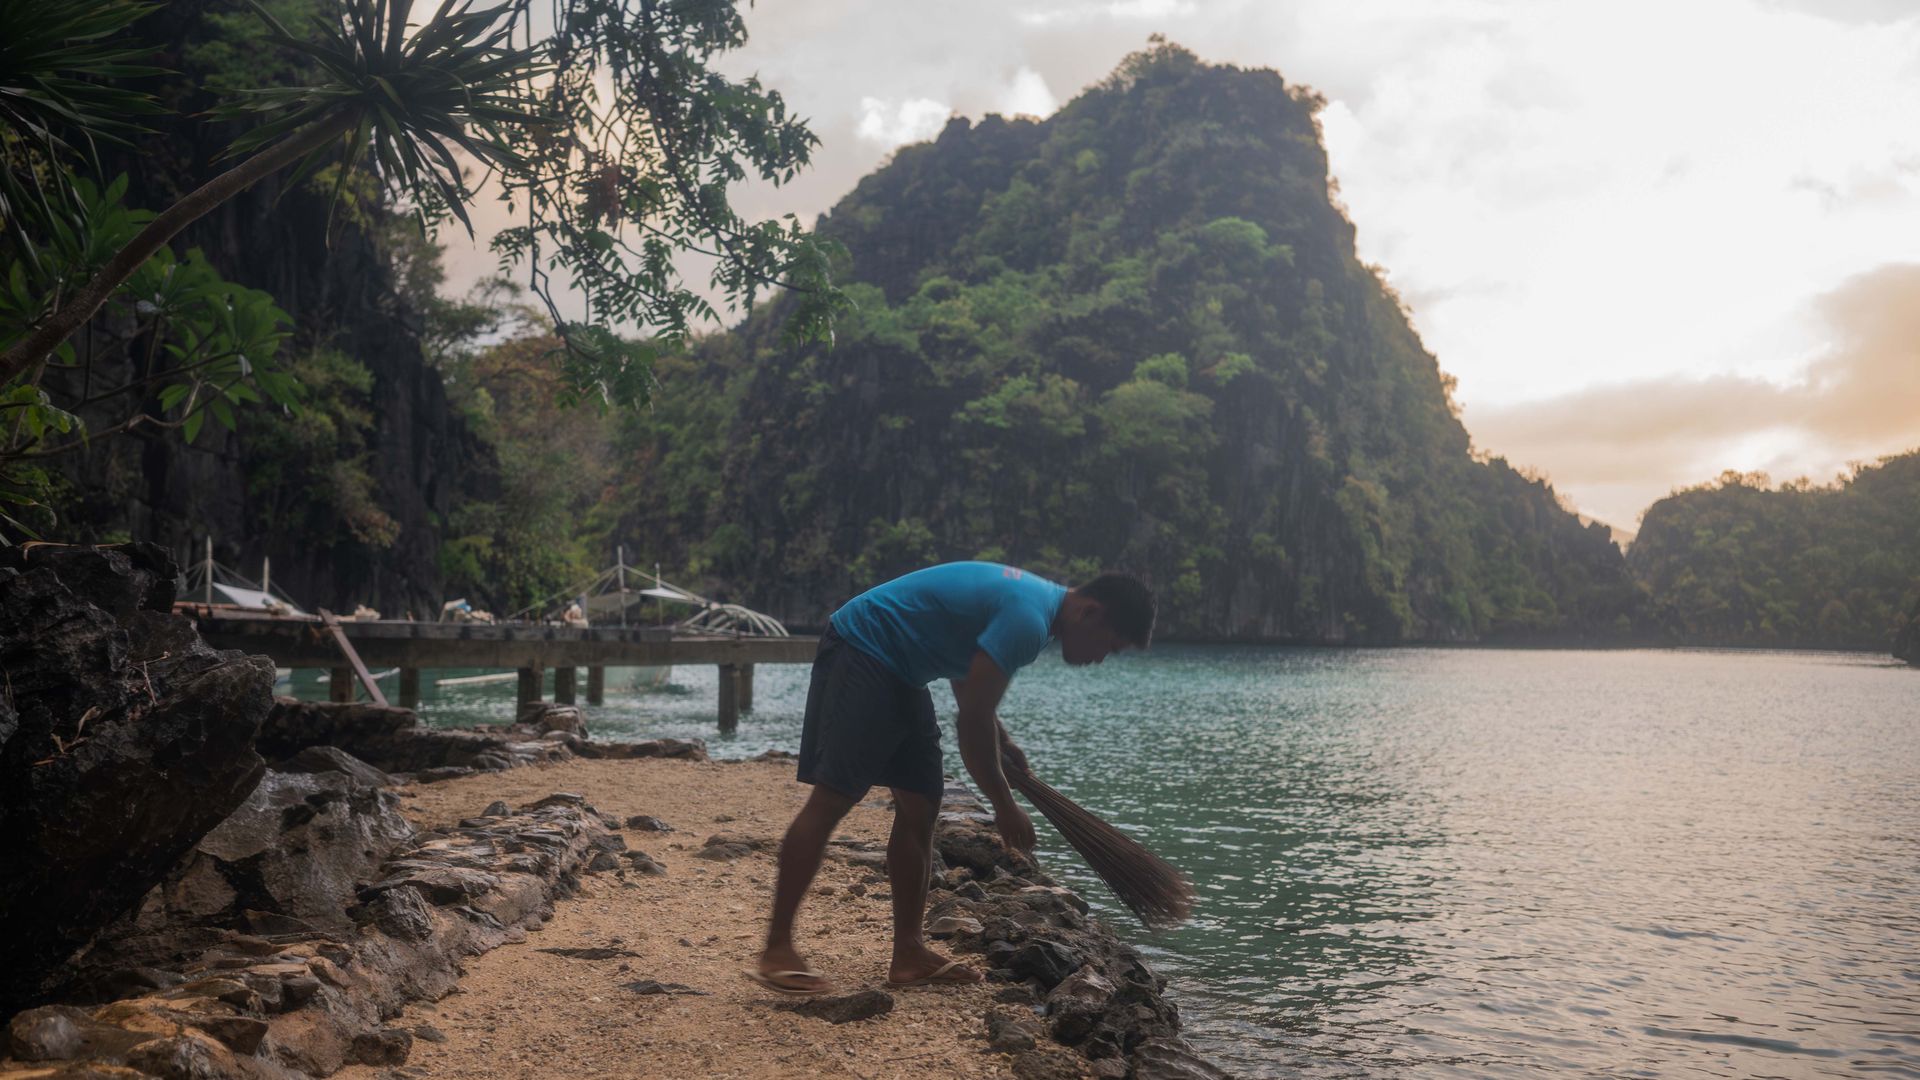 Mr Aguilar beginning his day’s work on the beach that tourists pass through to get to the lake. PHOTO: VINA SALAZAR